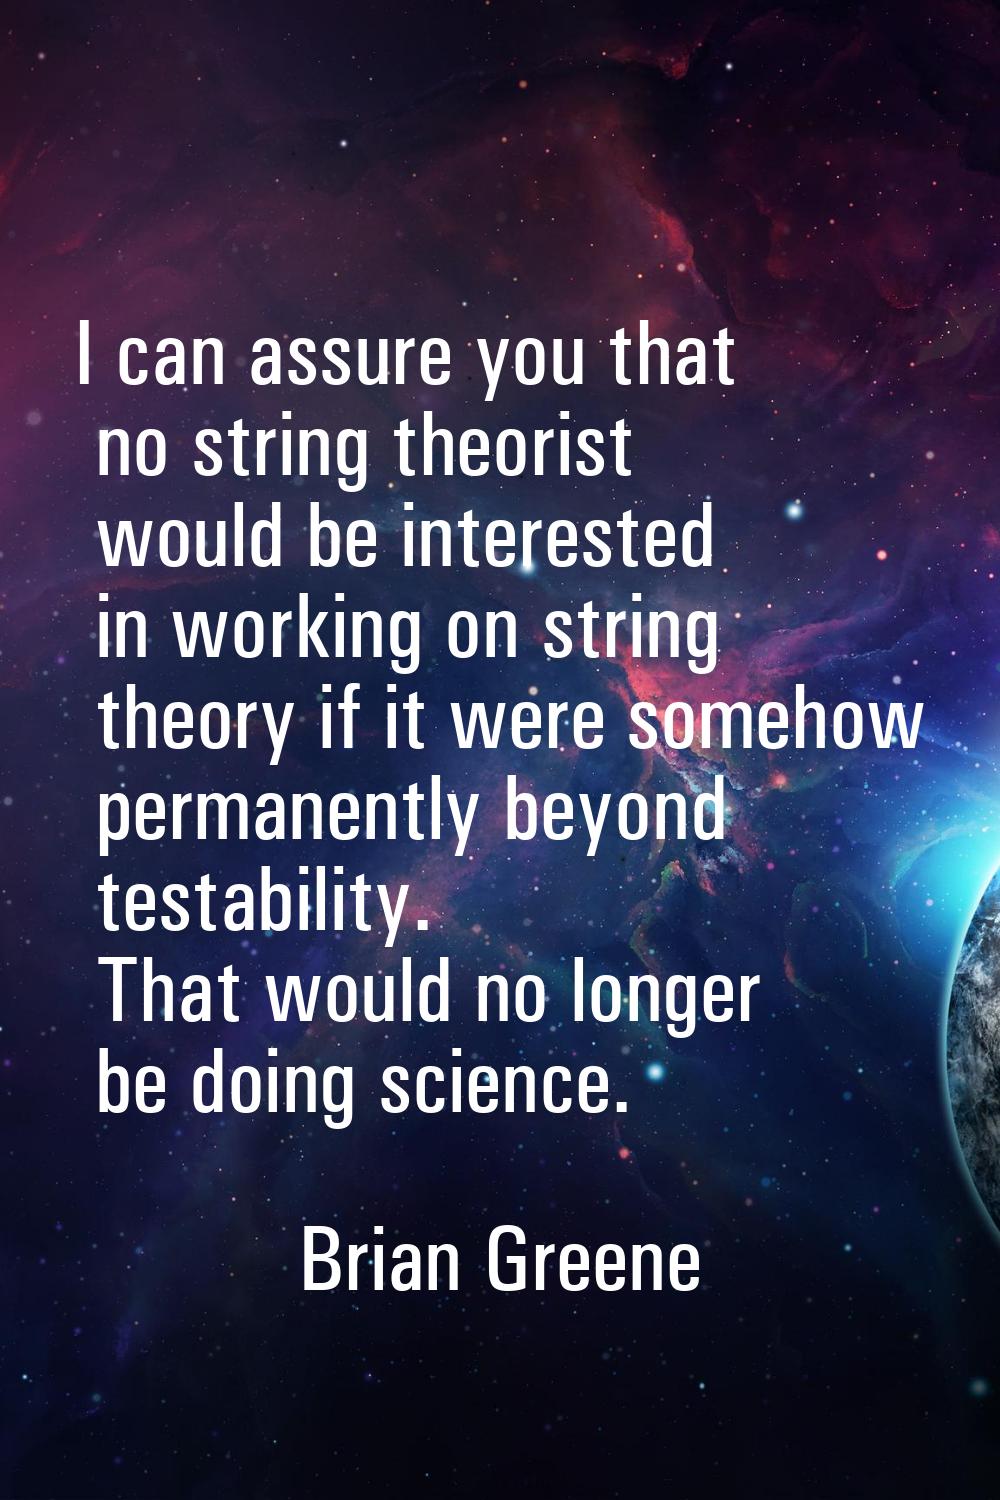 I can assure you that no string theorist would be interested in working on string theory if it were